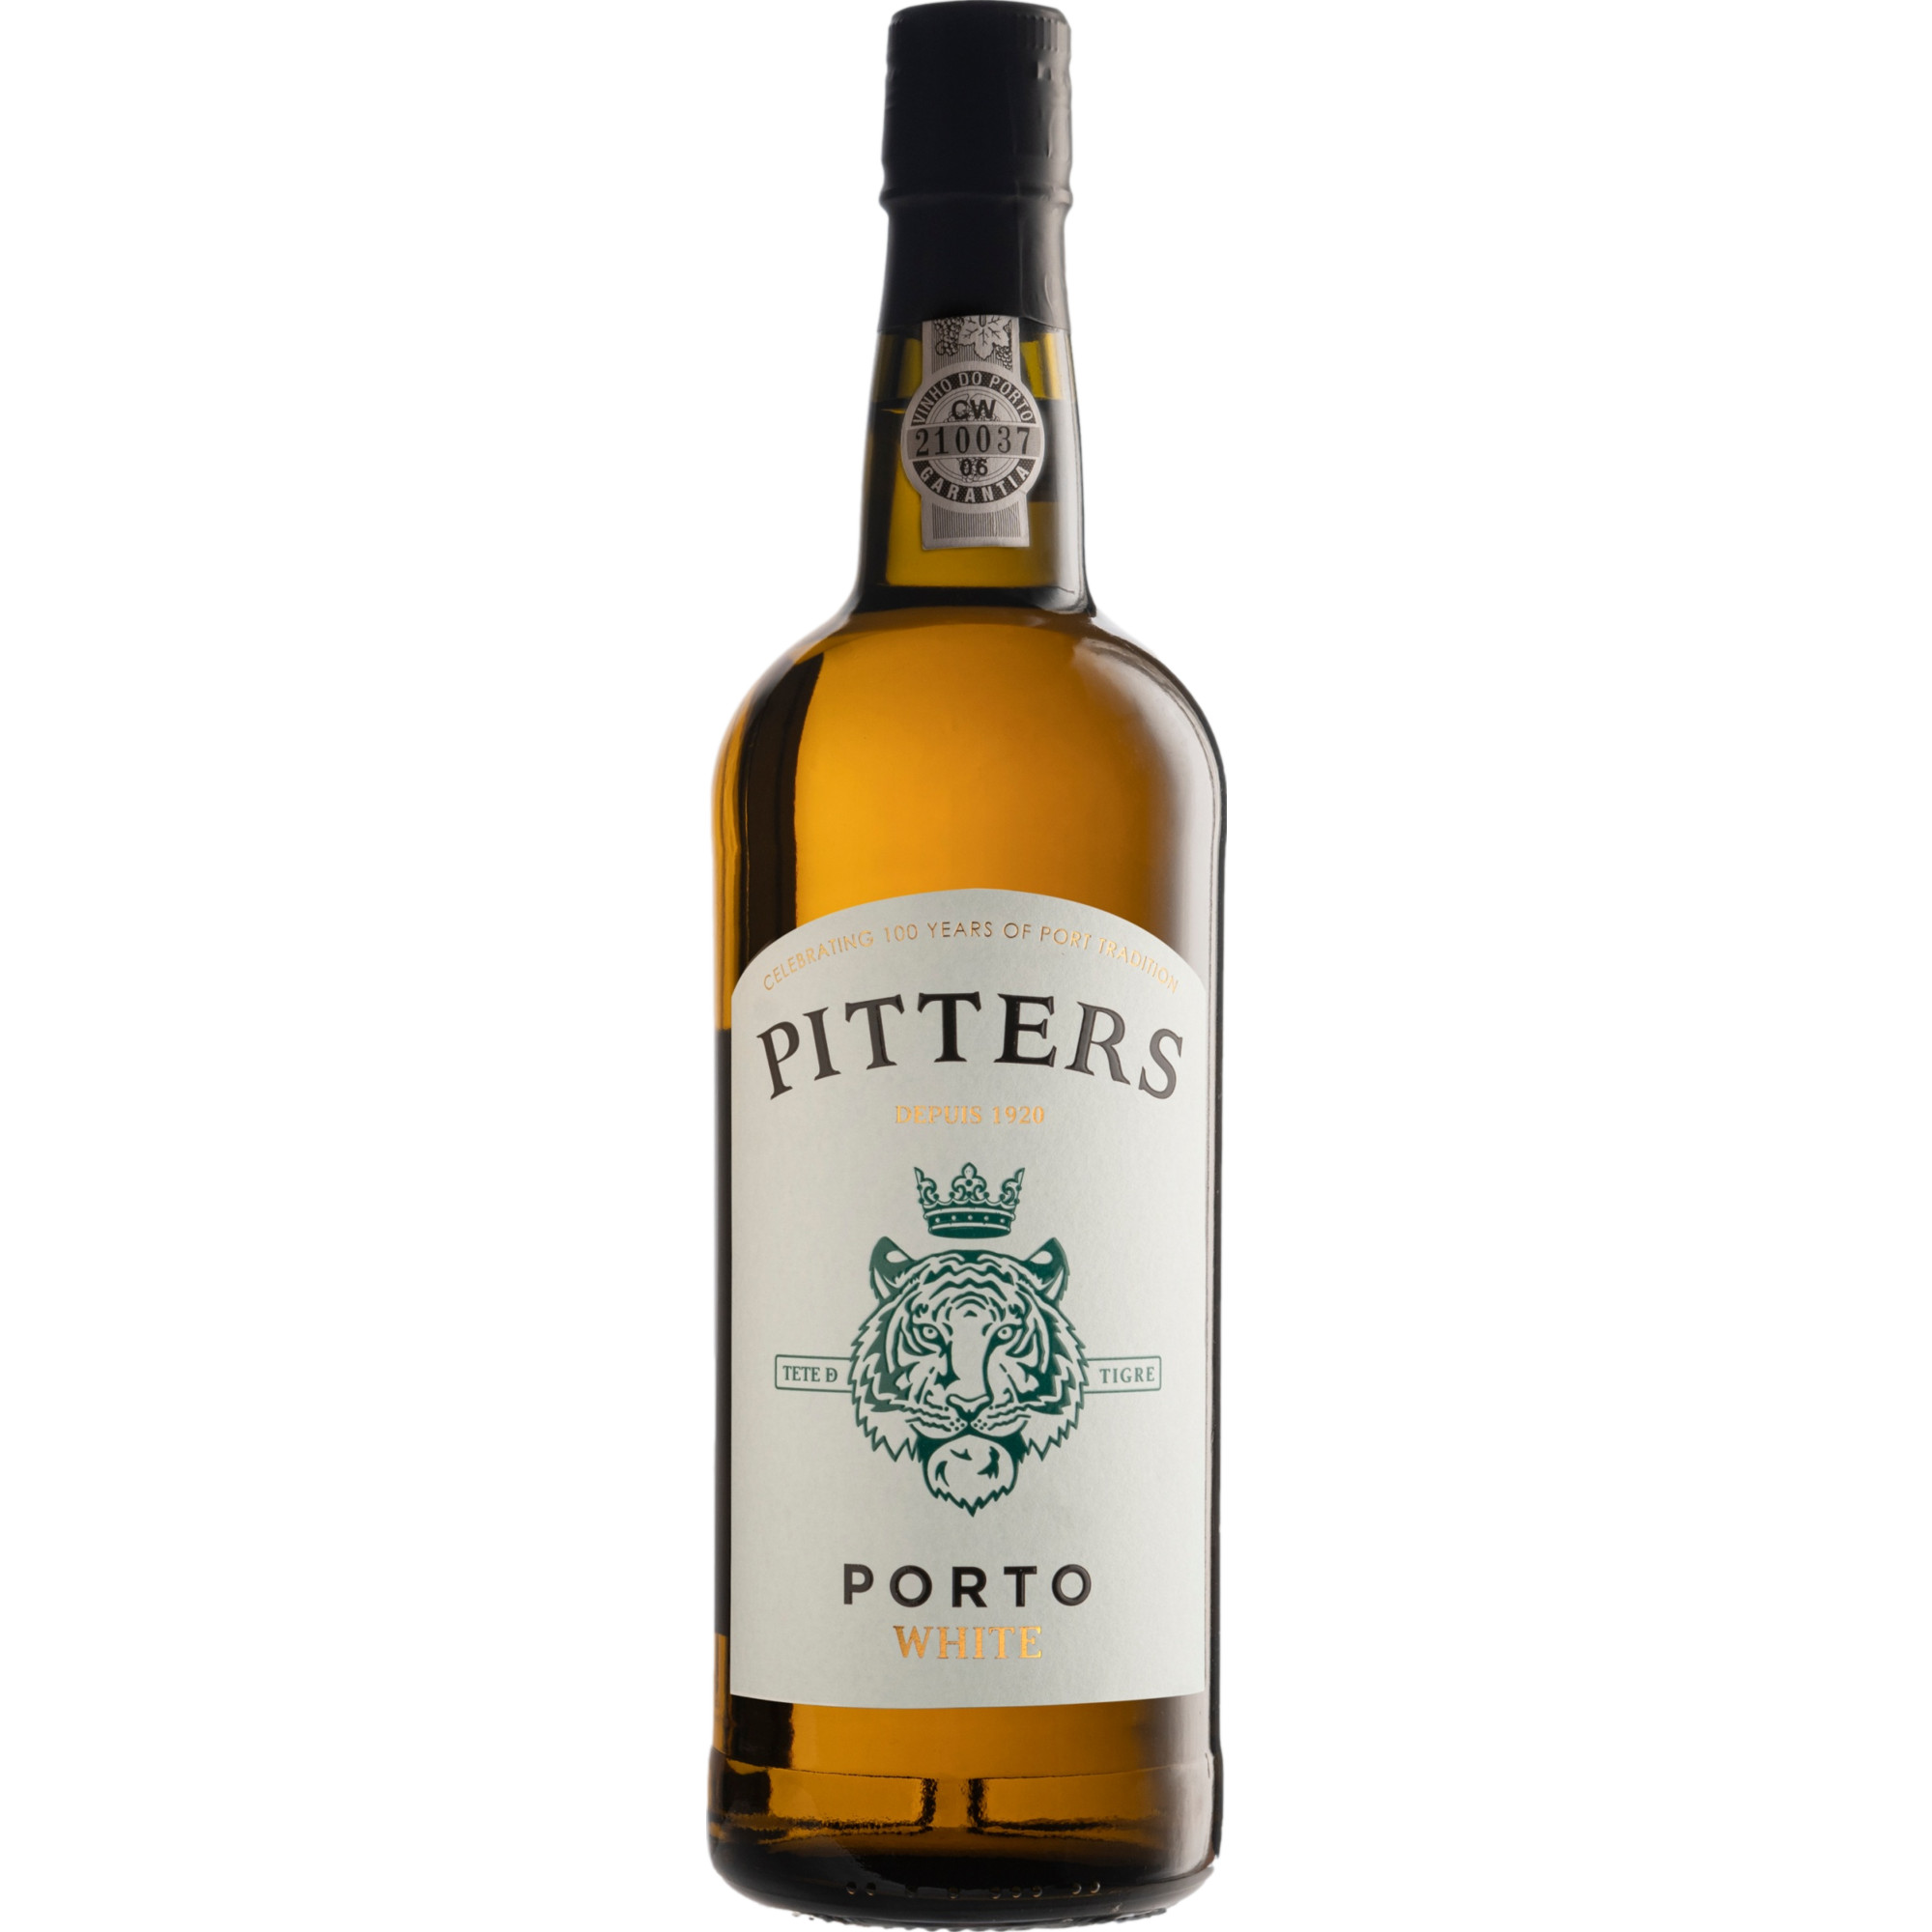 Pitters White Port